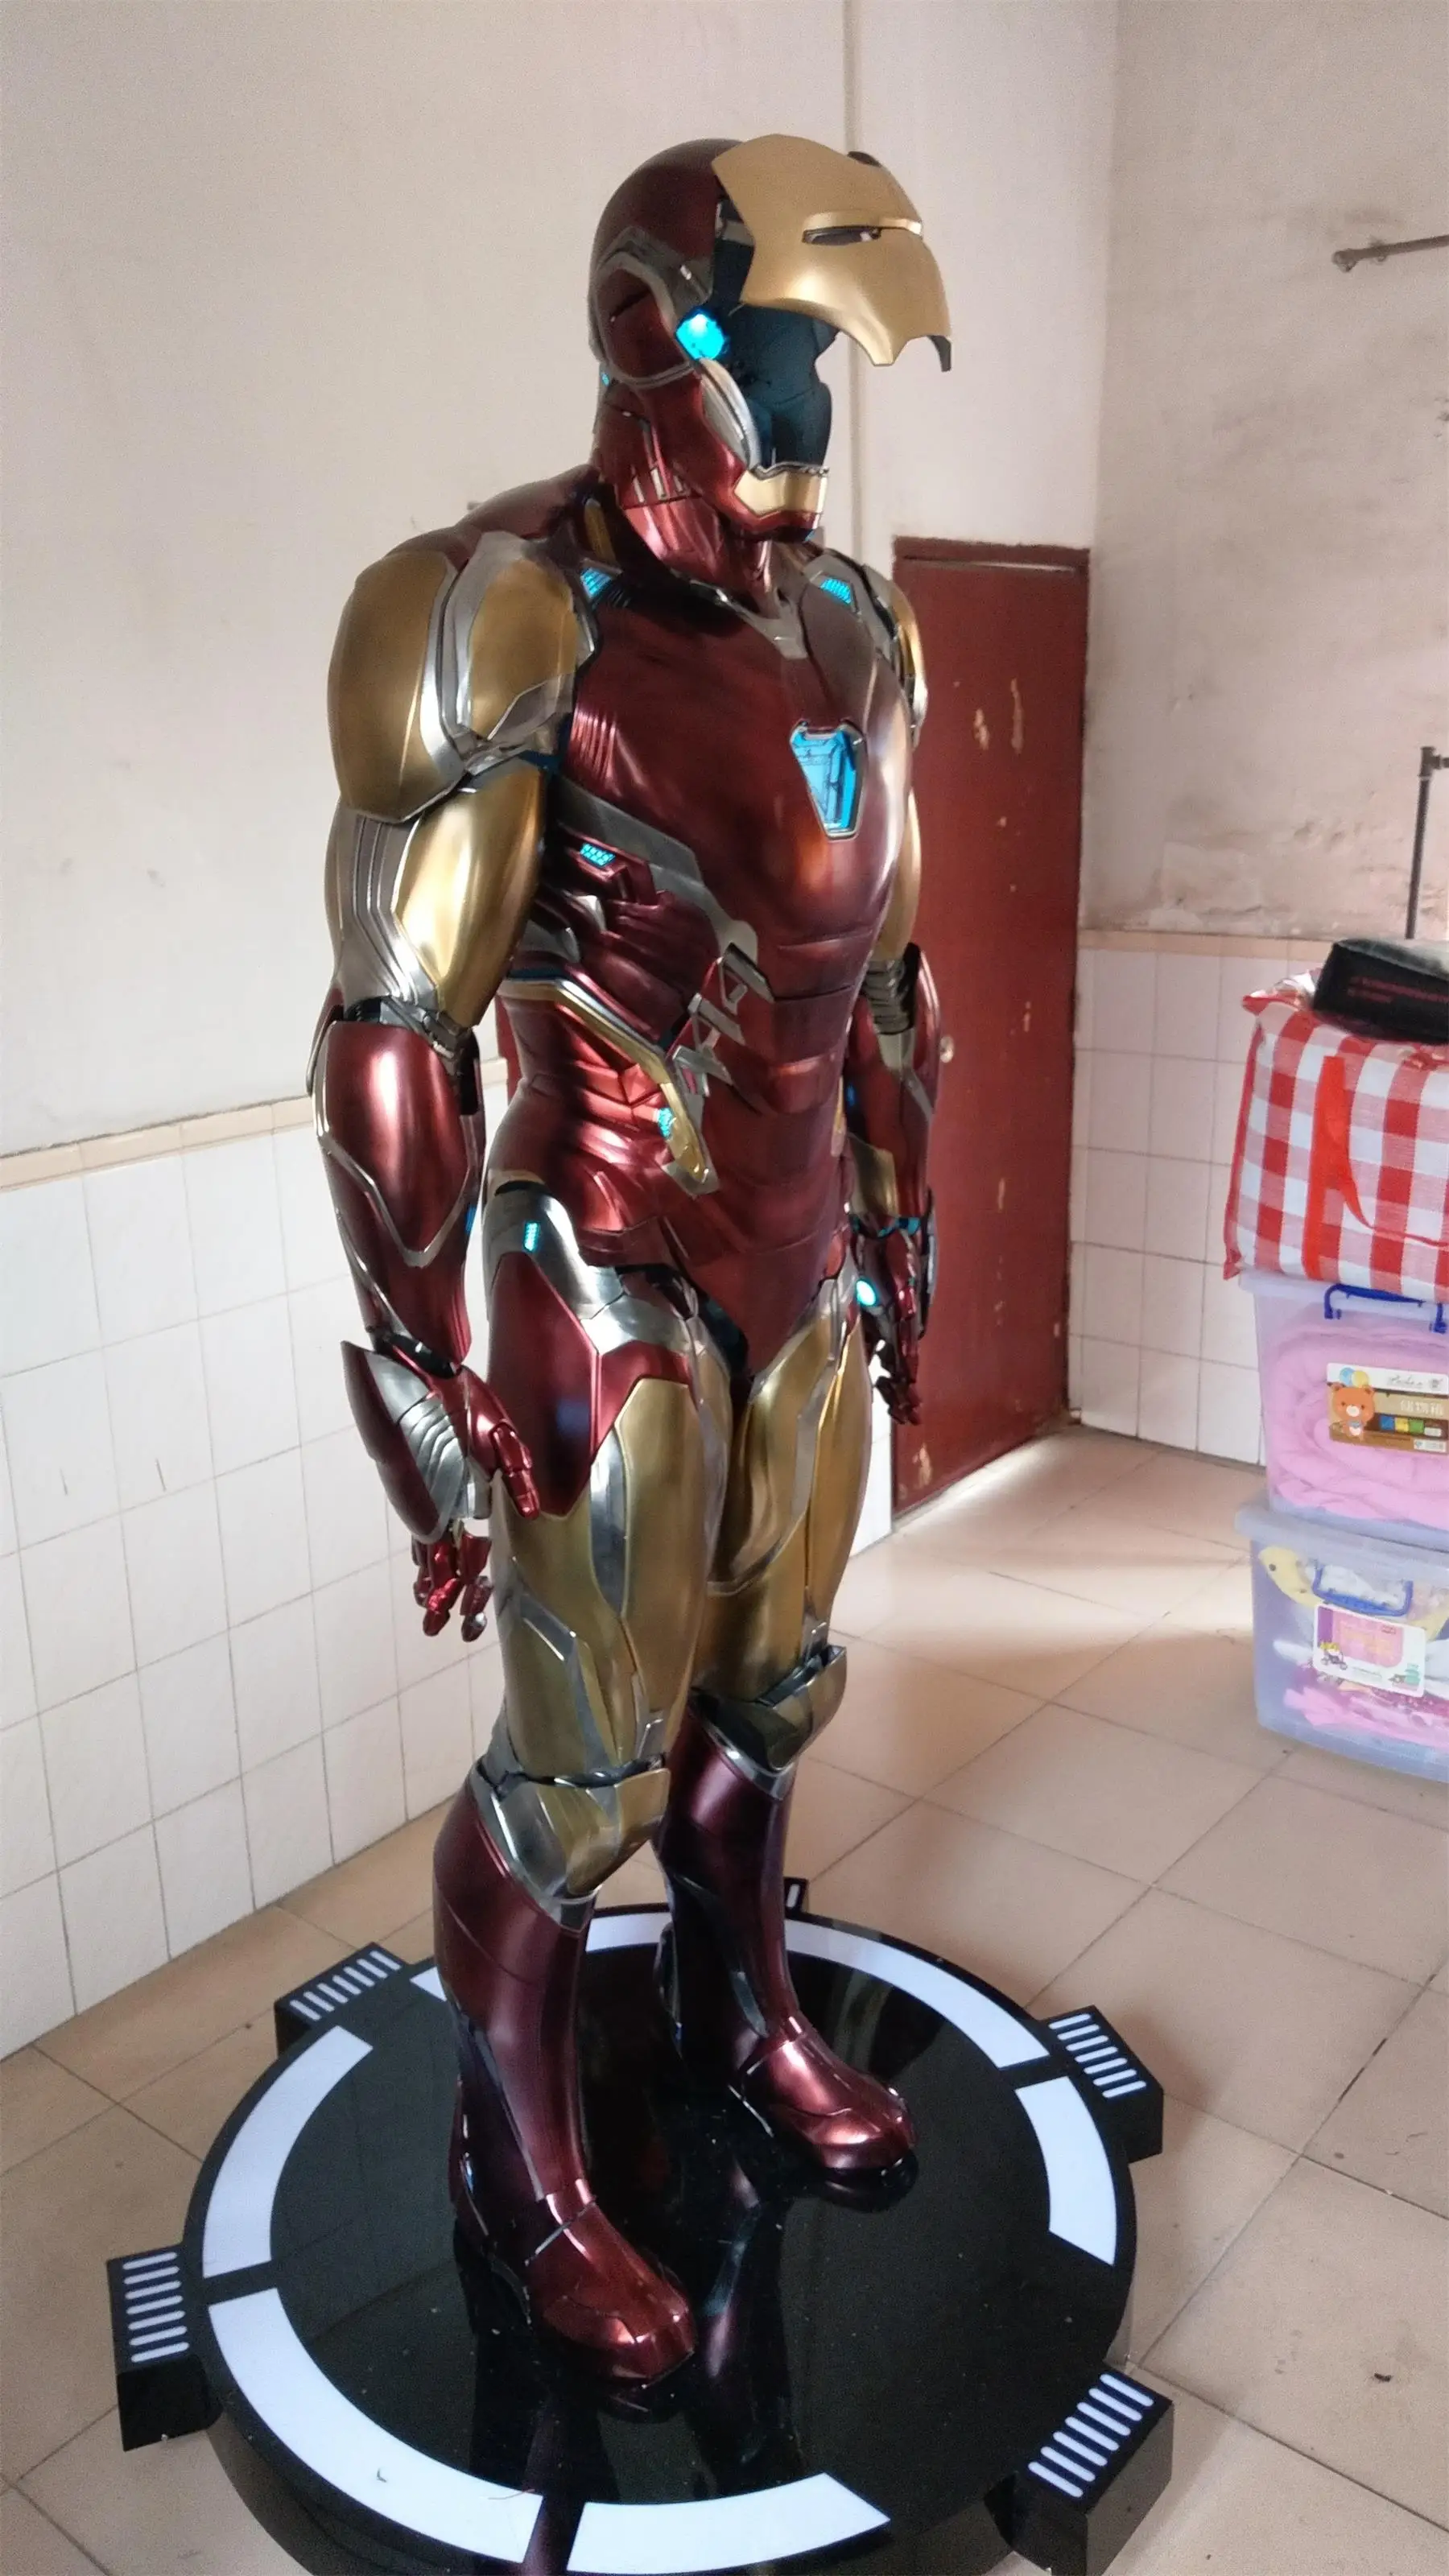 

Hot Customization 1/1 Marvel Mk85 Battle Armor Iron Man Armor Human Wearable All Over Real Person Helmet Statue Amazing Cosplay